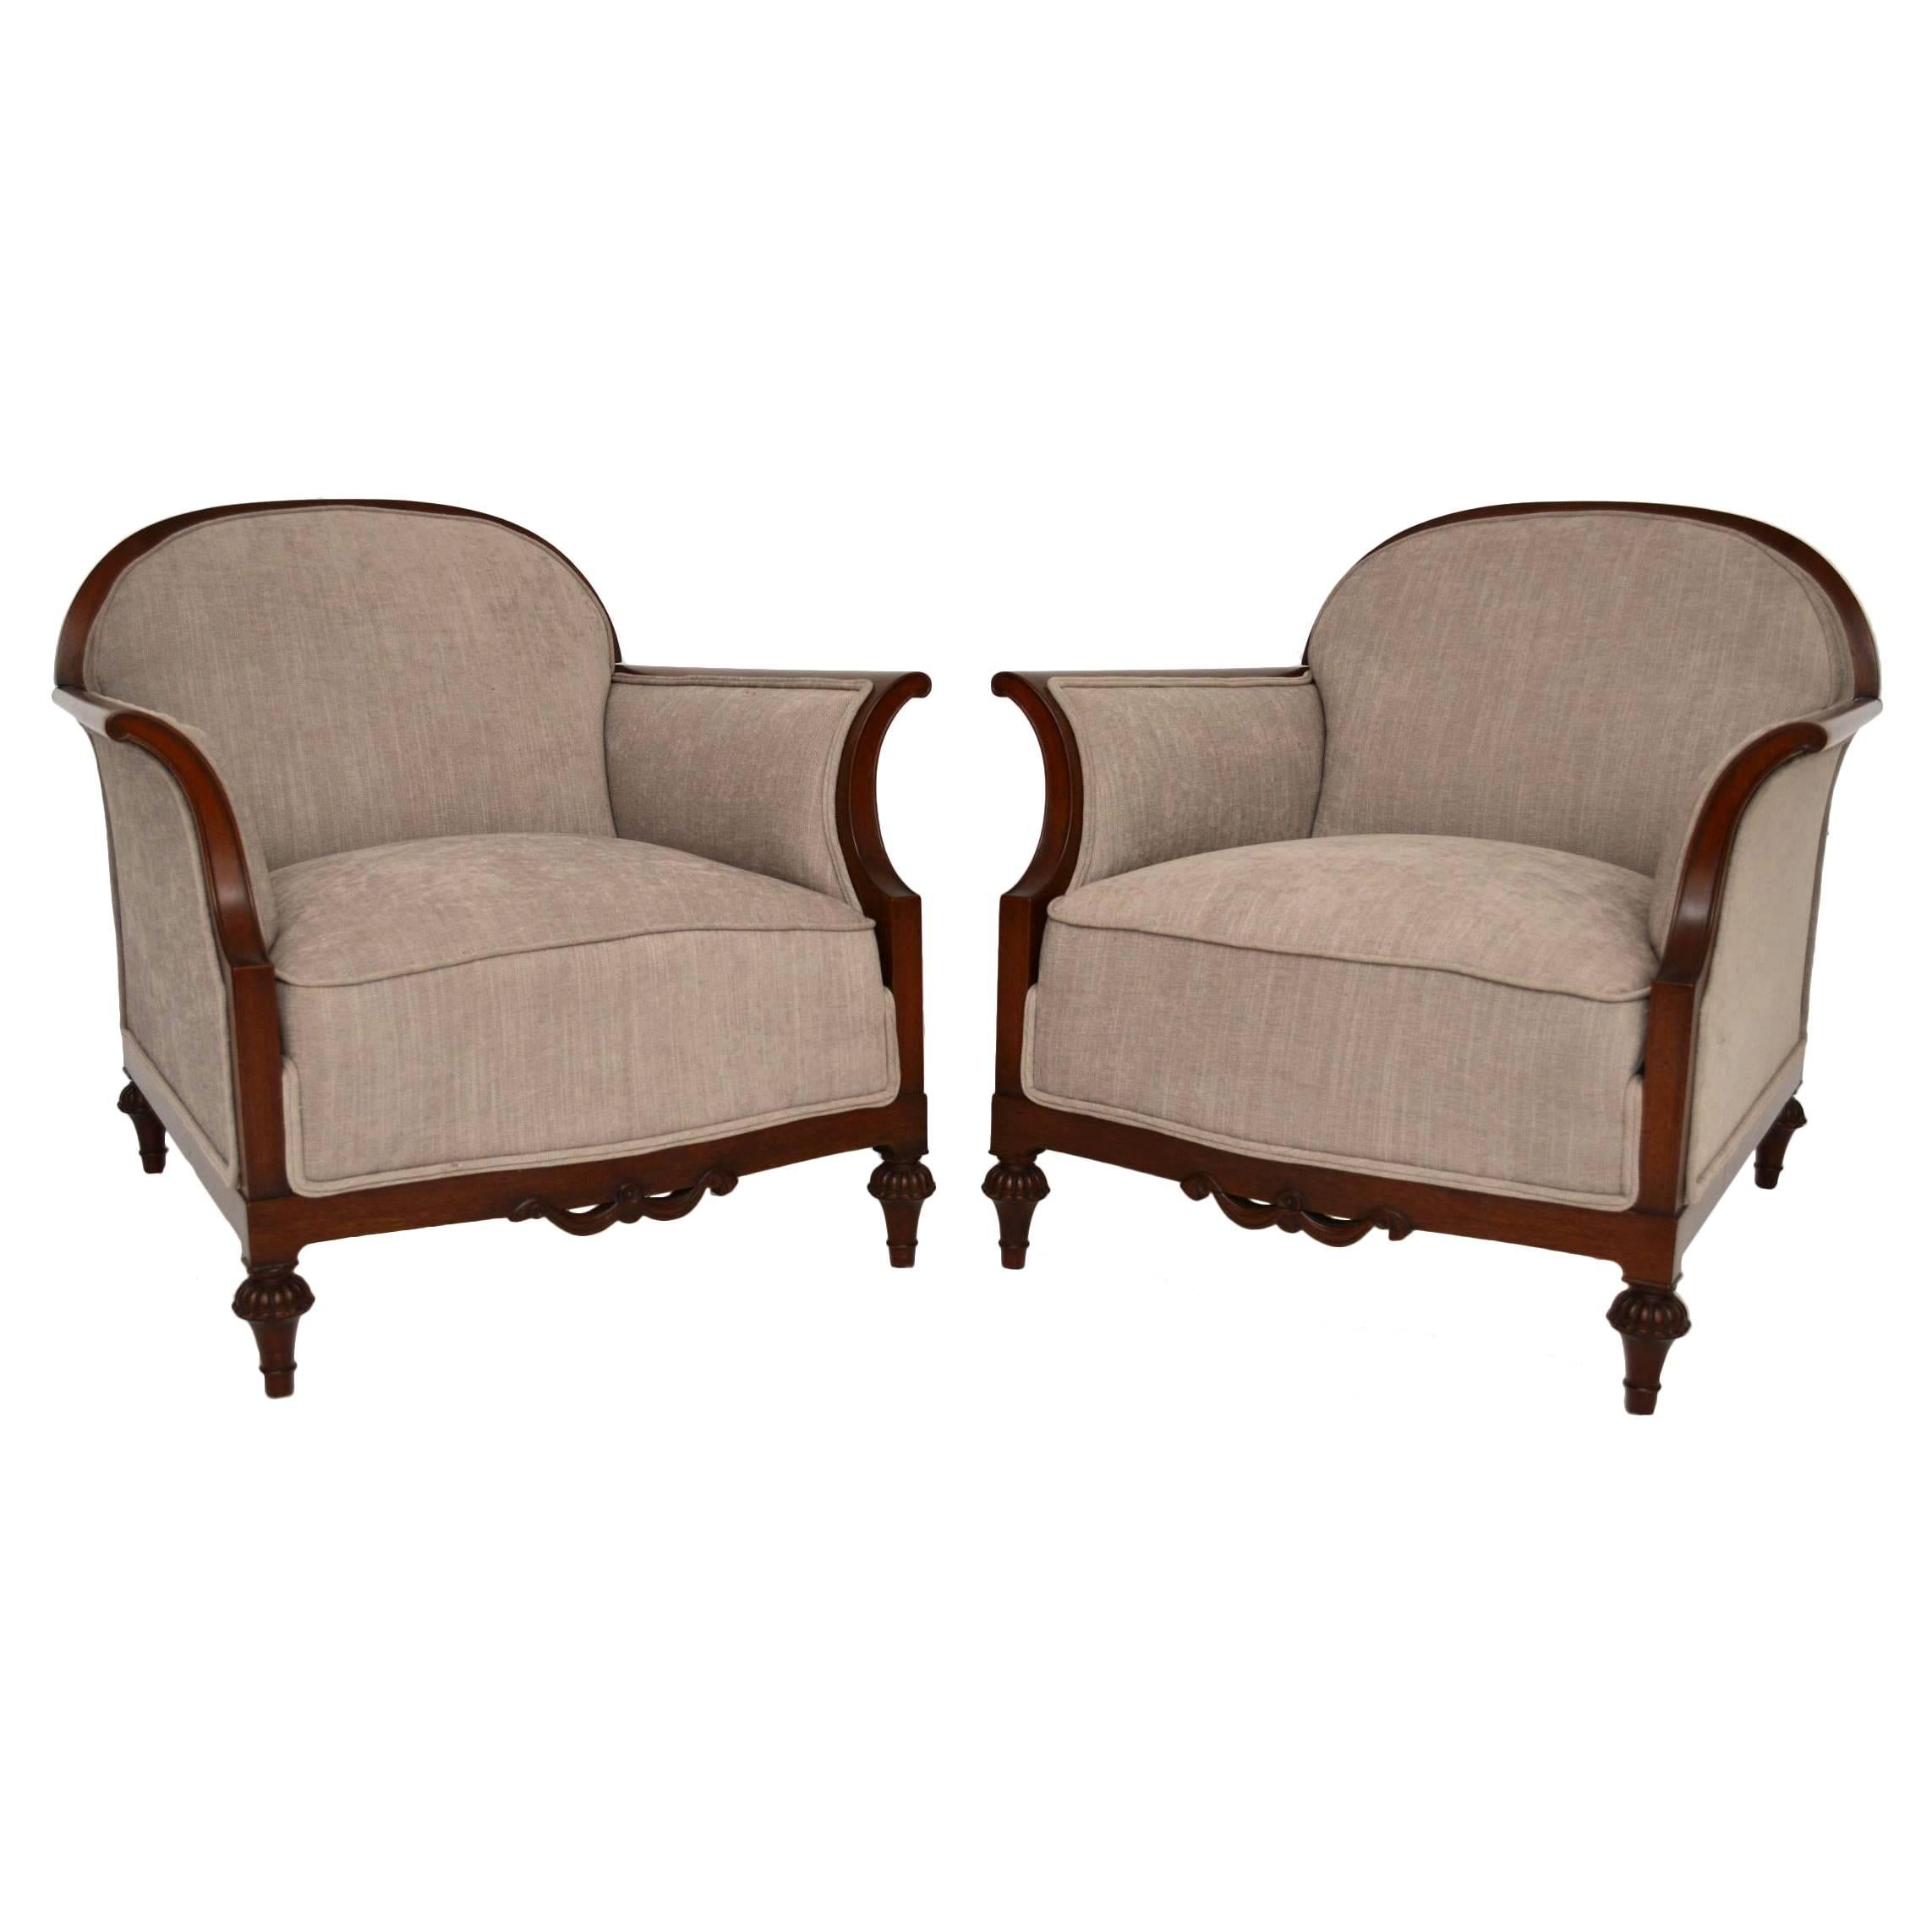 Pair of Antique Swedish Upholstered Mahogany Armchairs